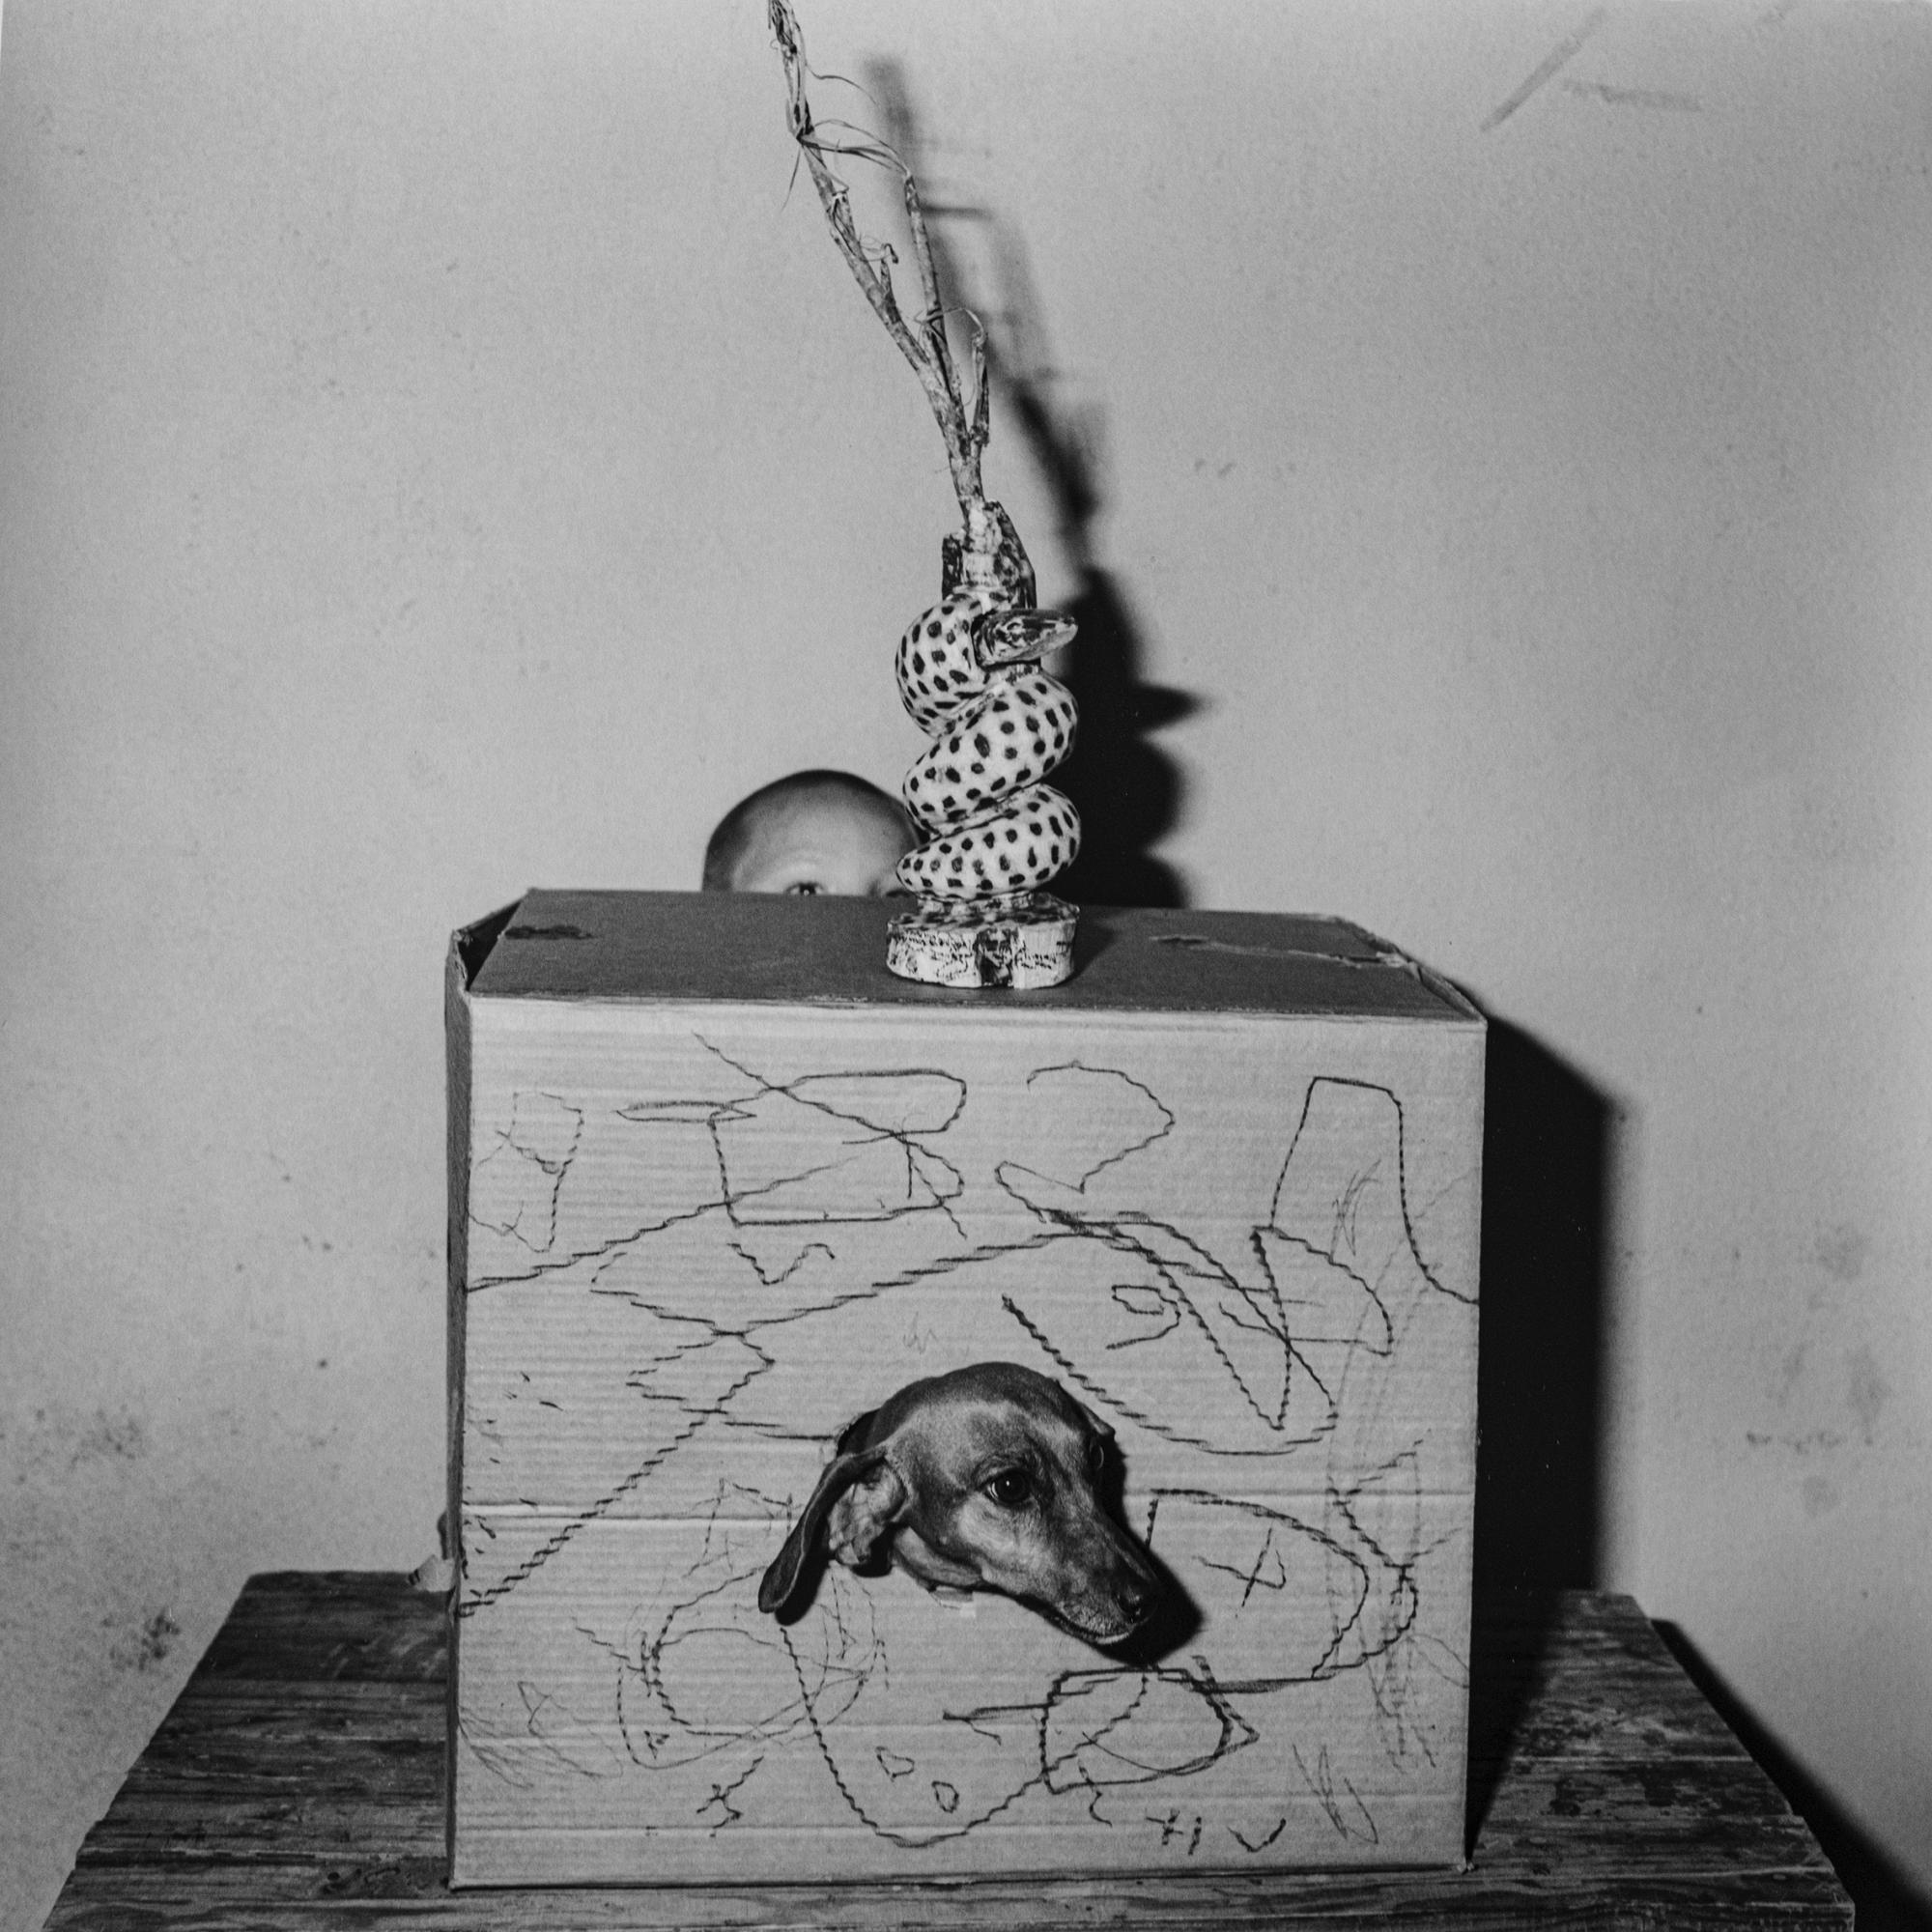 Roger BALLEN
Hide and Seek, 2003
Vintage silver gelatin print
Image 36 x 36 cm (14 1/8 x 14 1/8 in.)
Sheet 40 x 40 cm (15 3/4 x 15 3/4 in.)
Edition of 5 (#2/5)
Signed and dated verso in pencil
Print only

Christophe Guye Galerie offers a selection